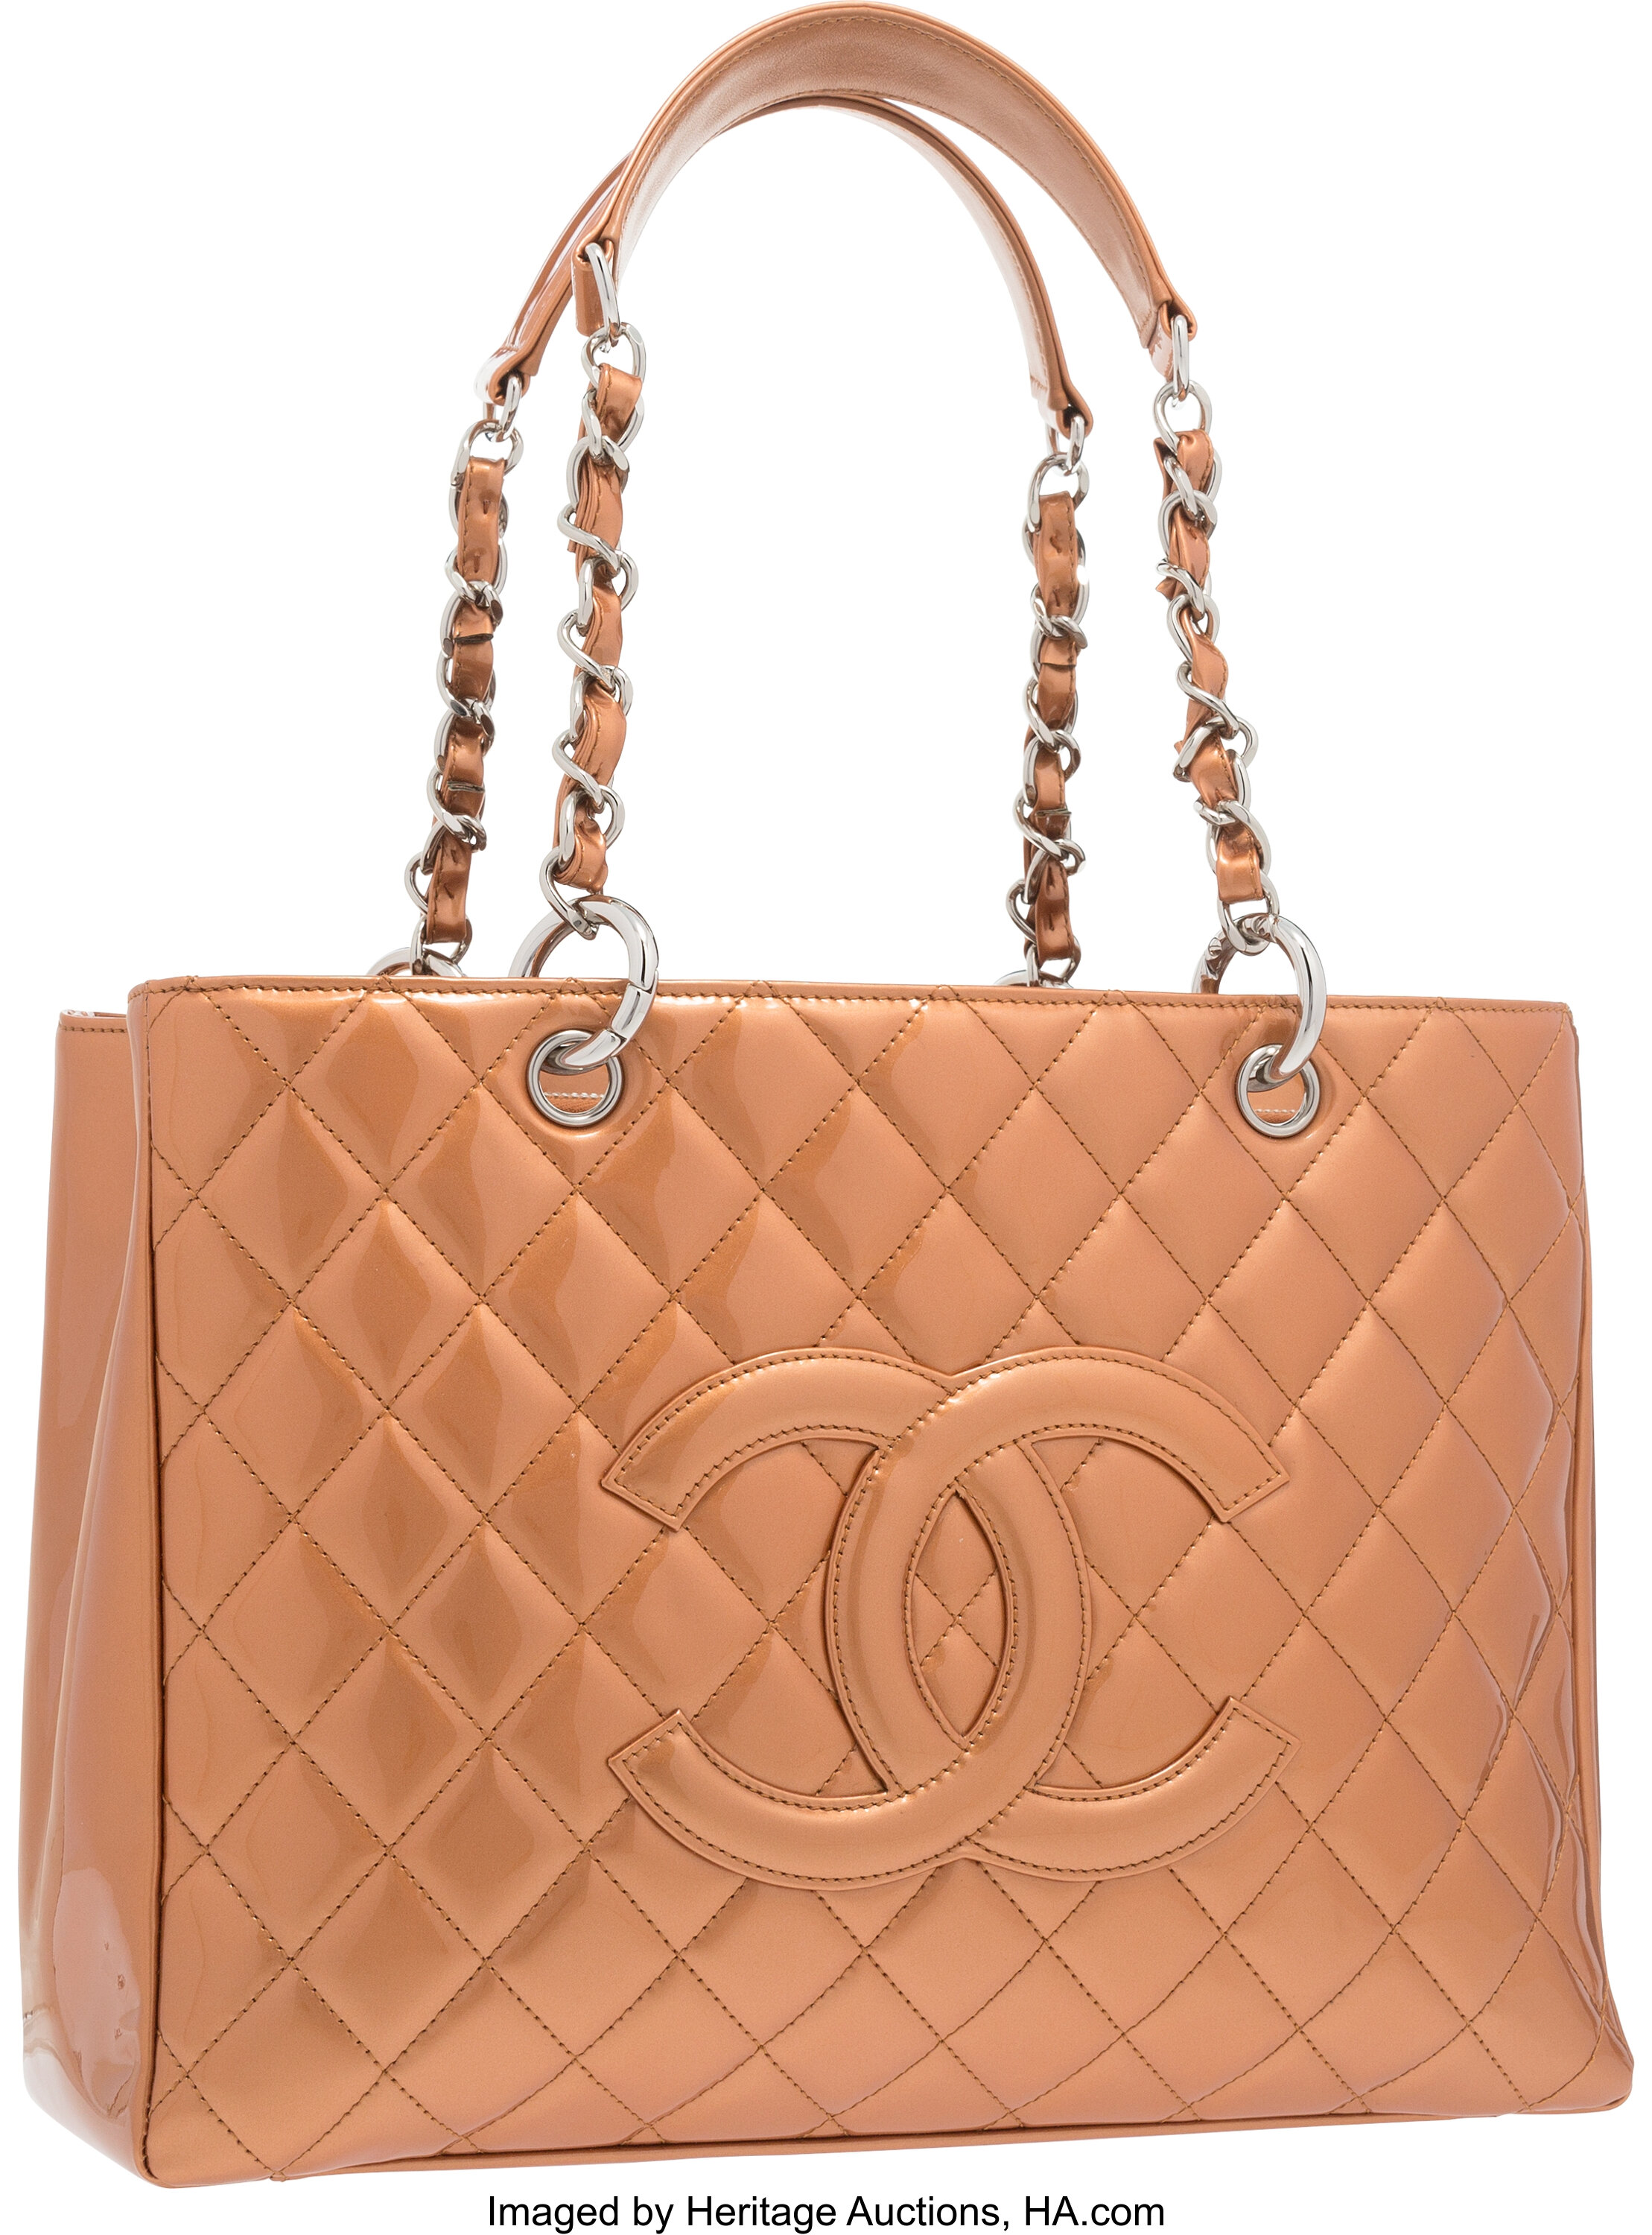 Chanel Pearlescent Dark Beige Quilted Patent Leather Grand